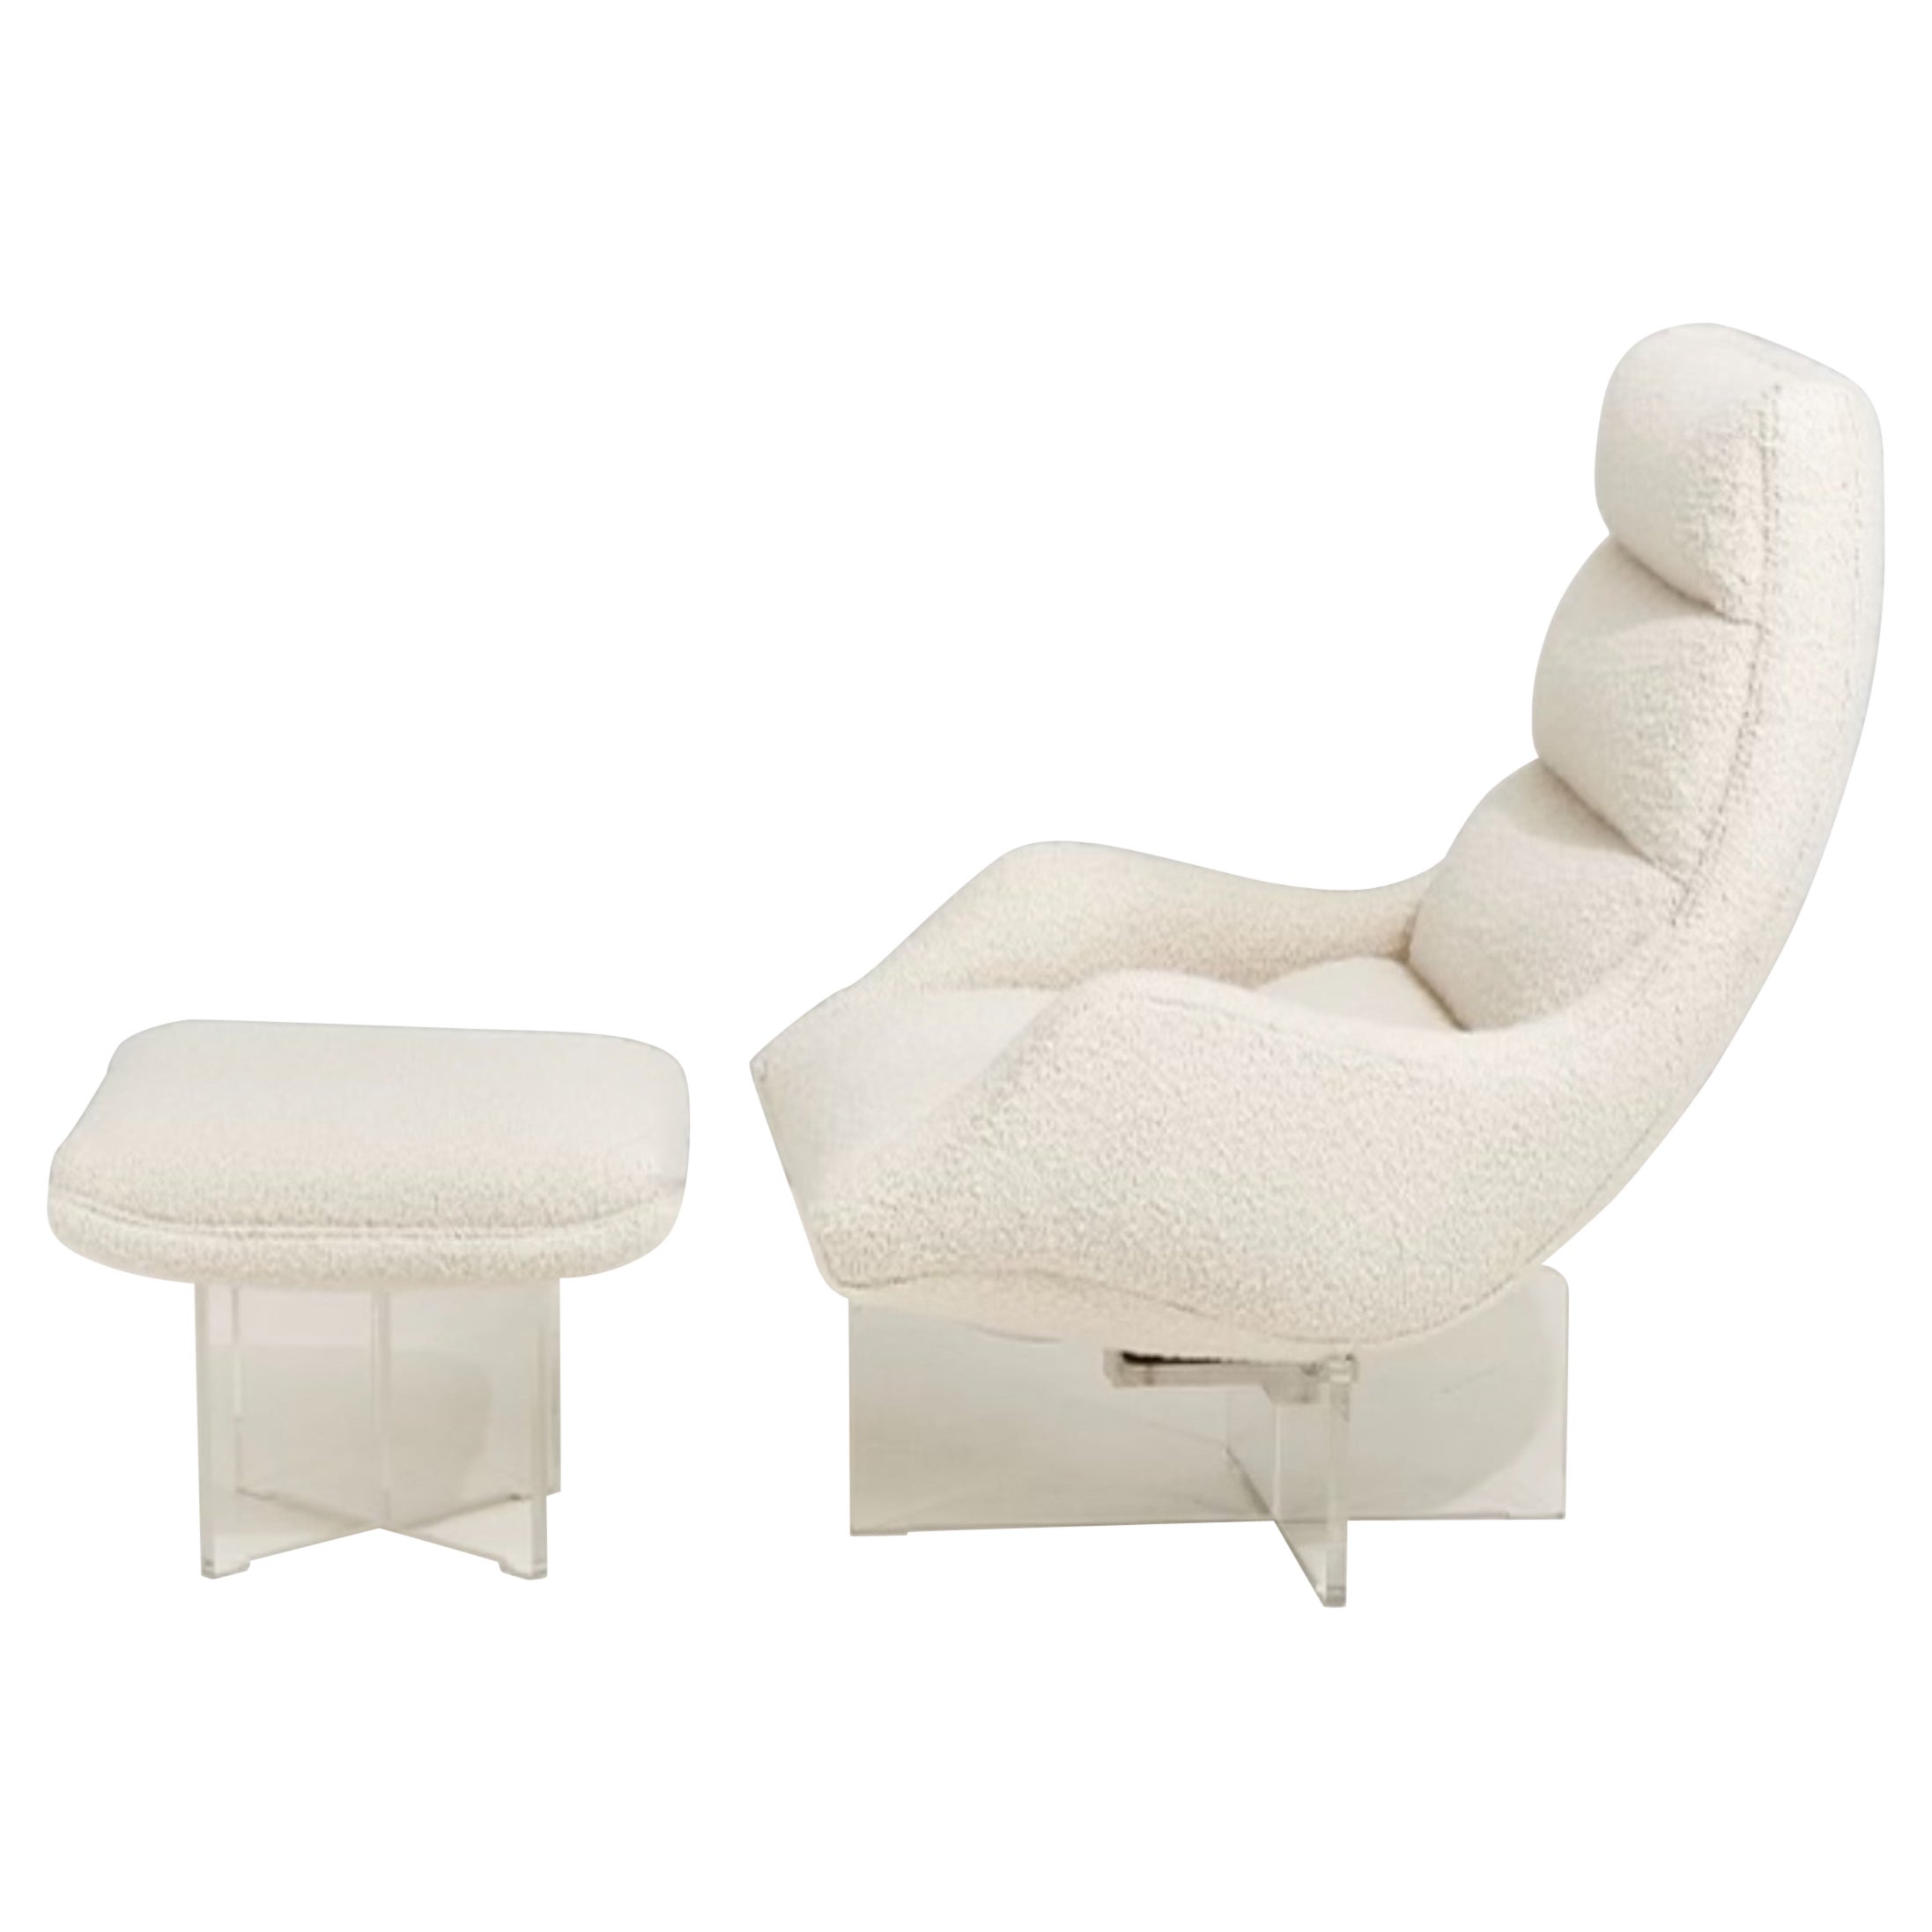 Vladimir Kagan “Cosmos” Lounge Chair and Ottoman in White Boucle